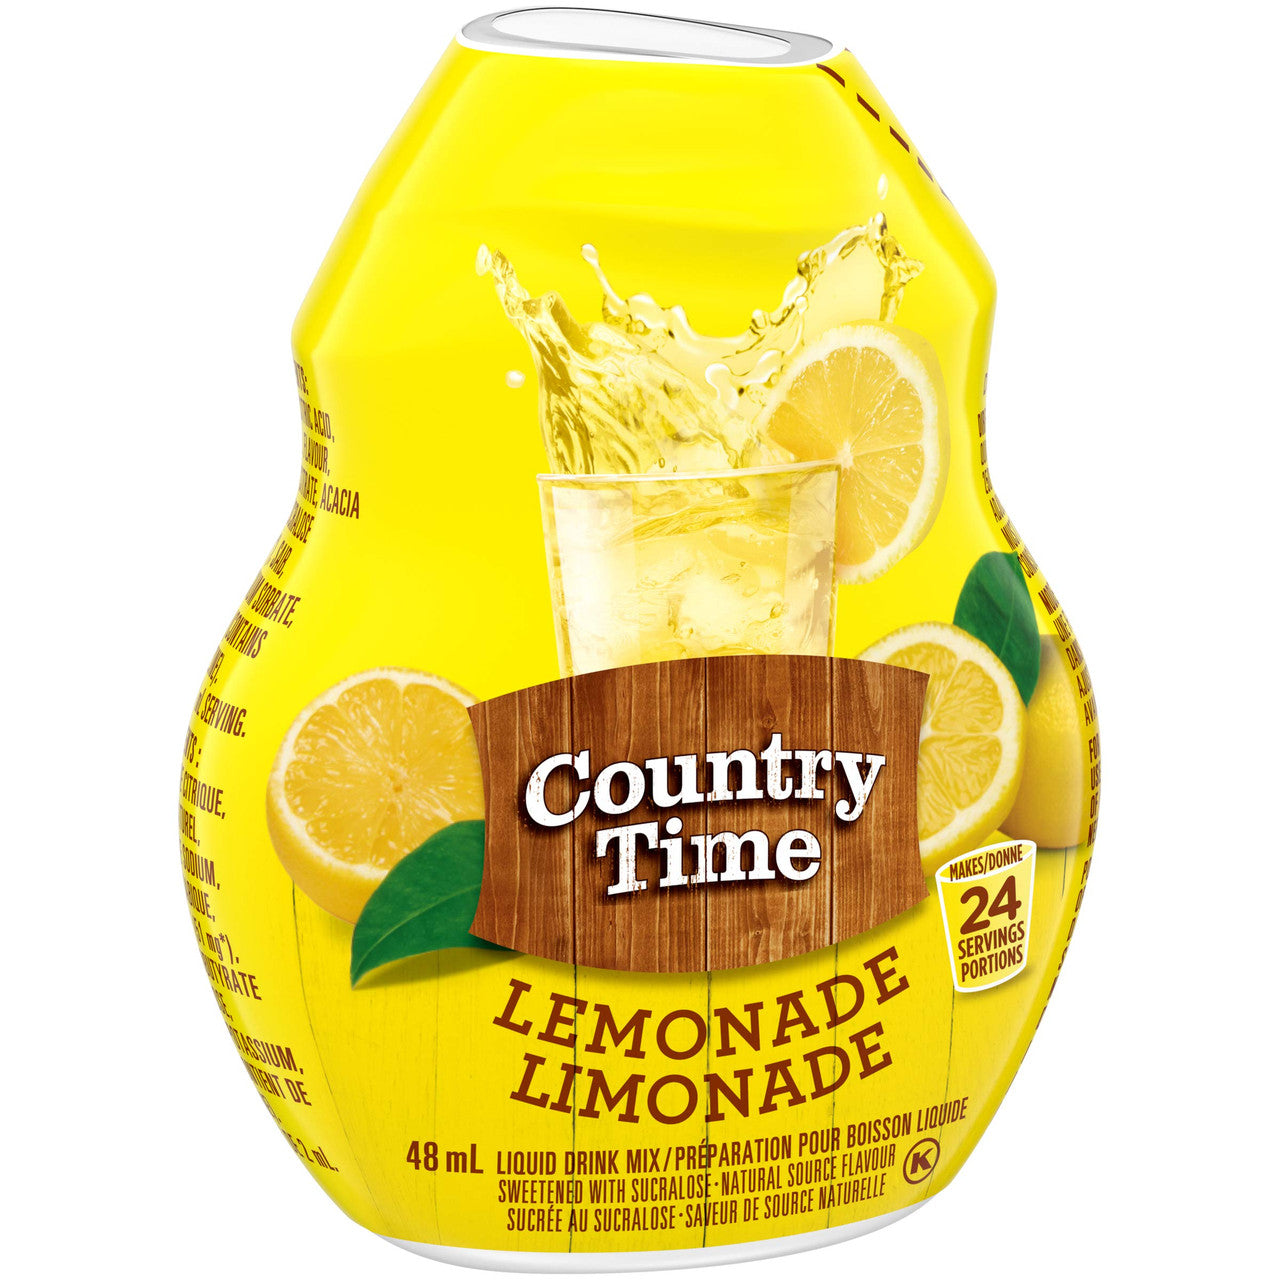 COUNTRY TIME Liquid Drink Mix - Lemonade 48ml (Imported from Canada)